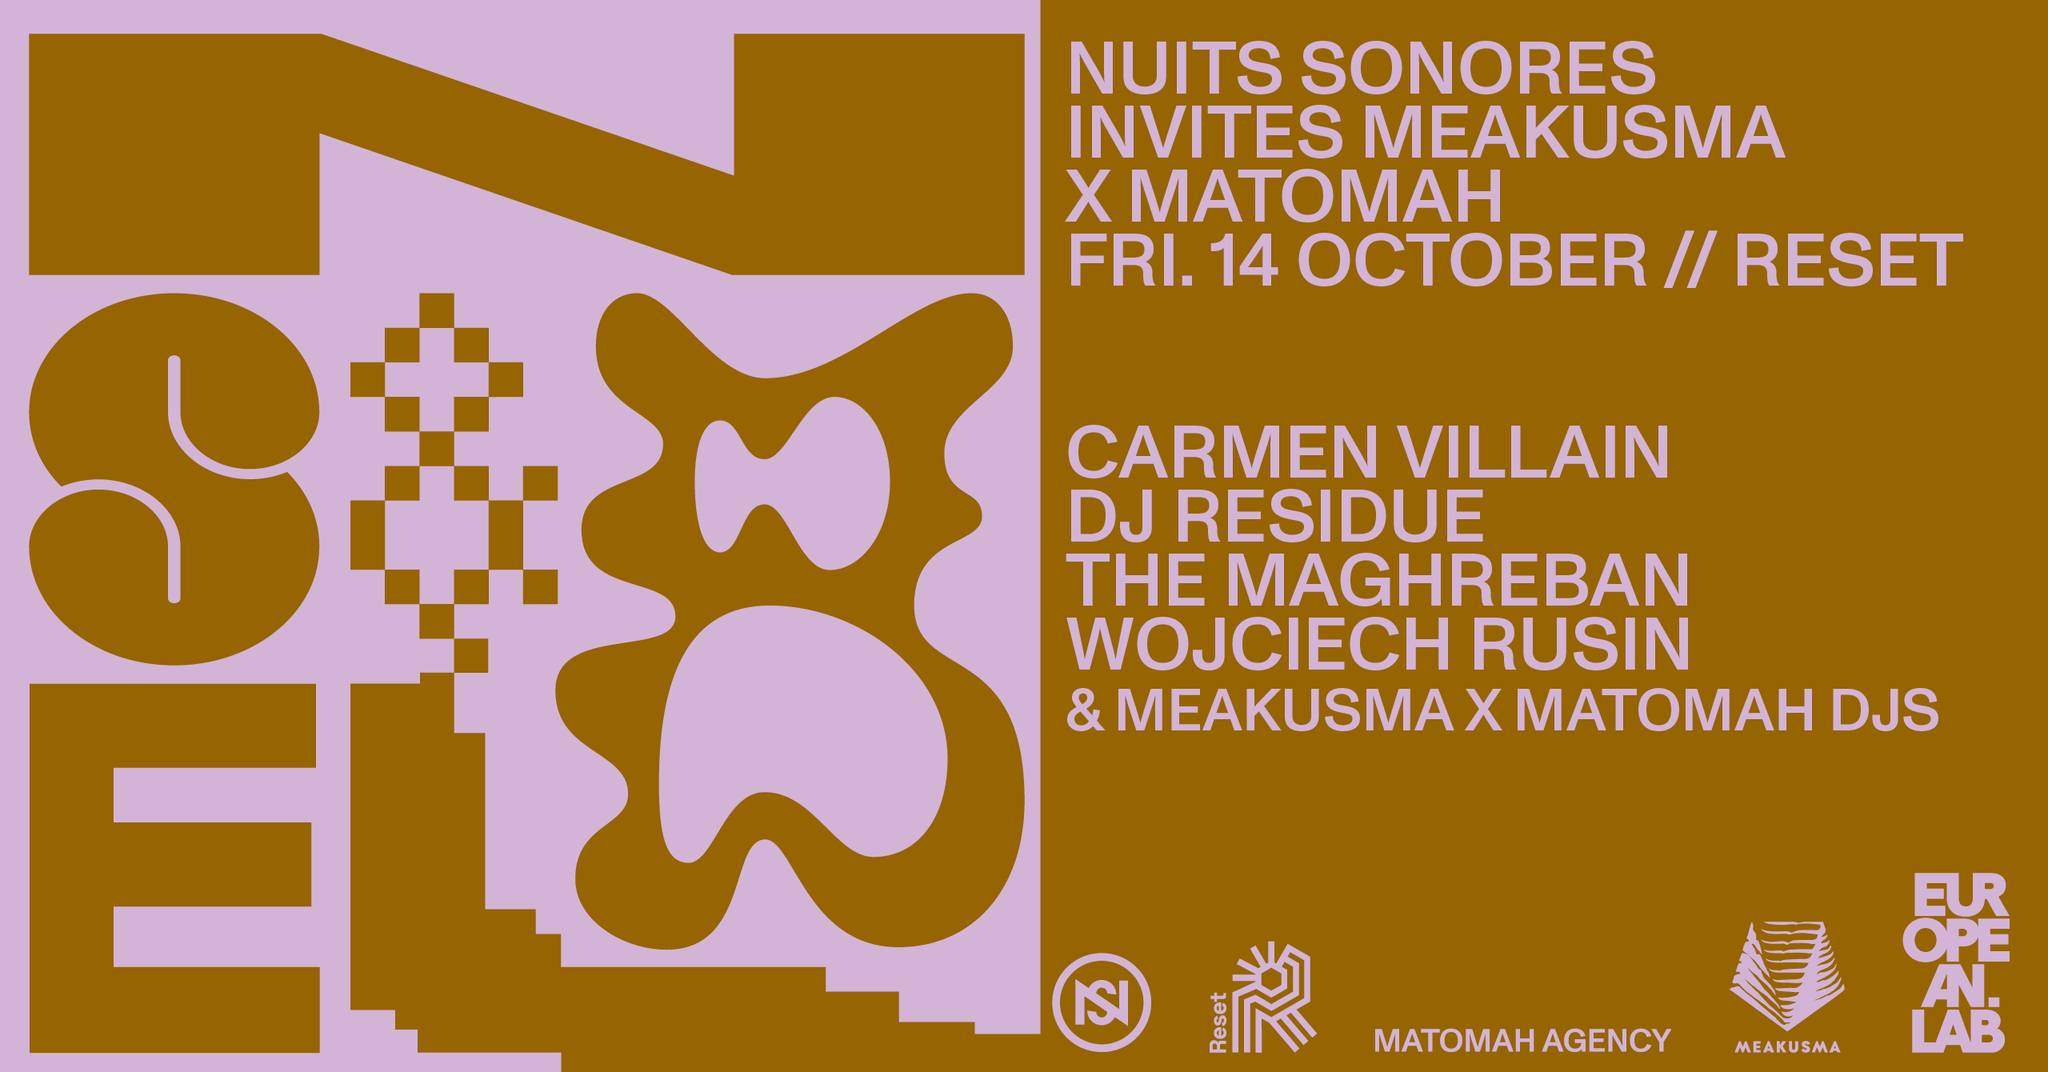 Nuits Sonores invites Meakusma x Matomah - Página frontal